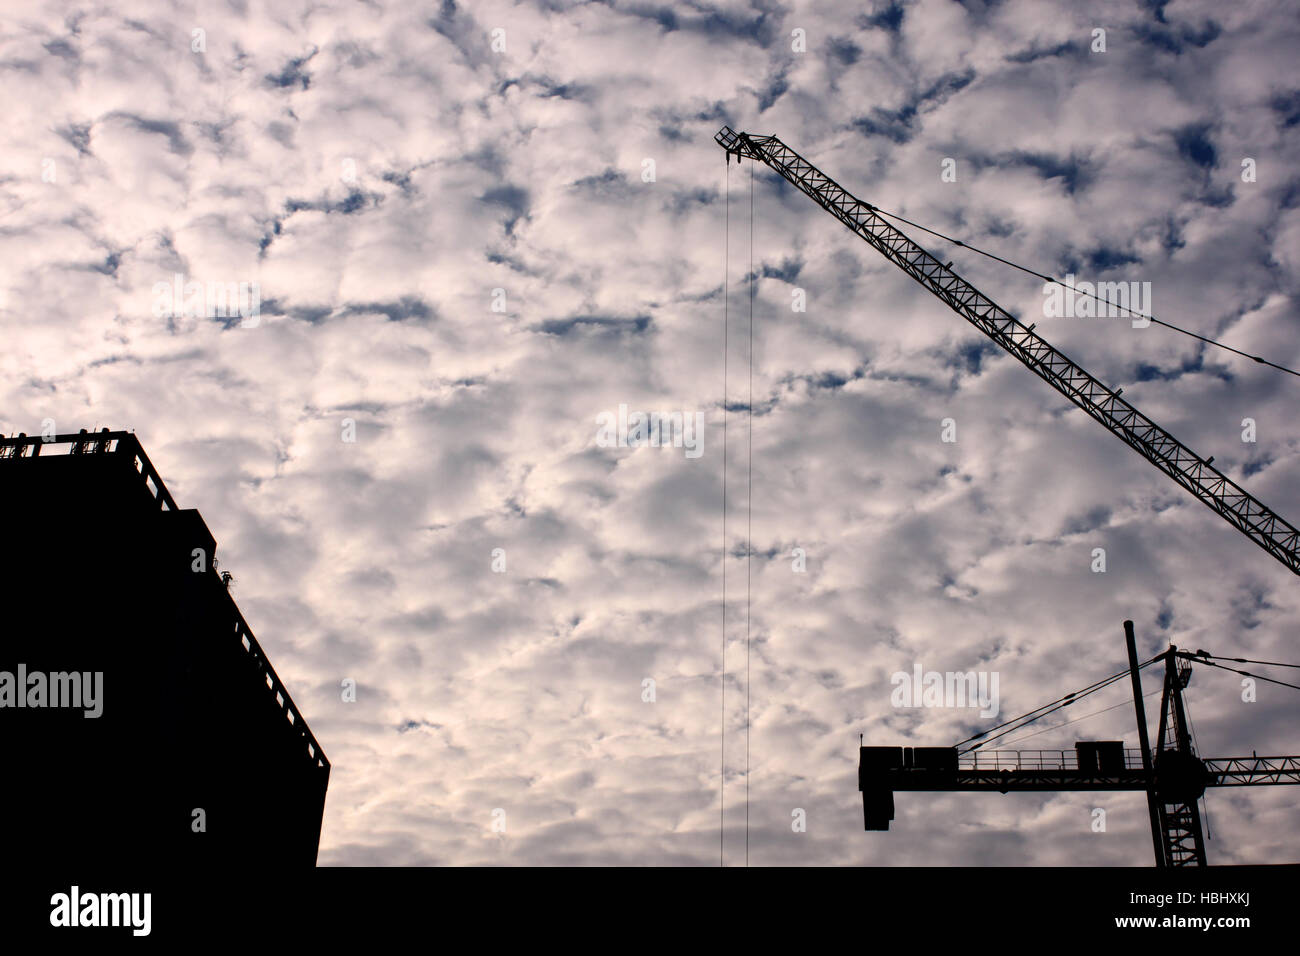 A crane is silhouetted against the sky at a construction site in Chulalongkorn University, Bangkok, Thailand. Stock Photo